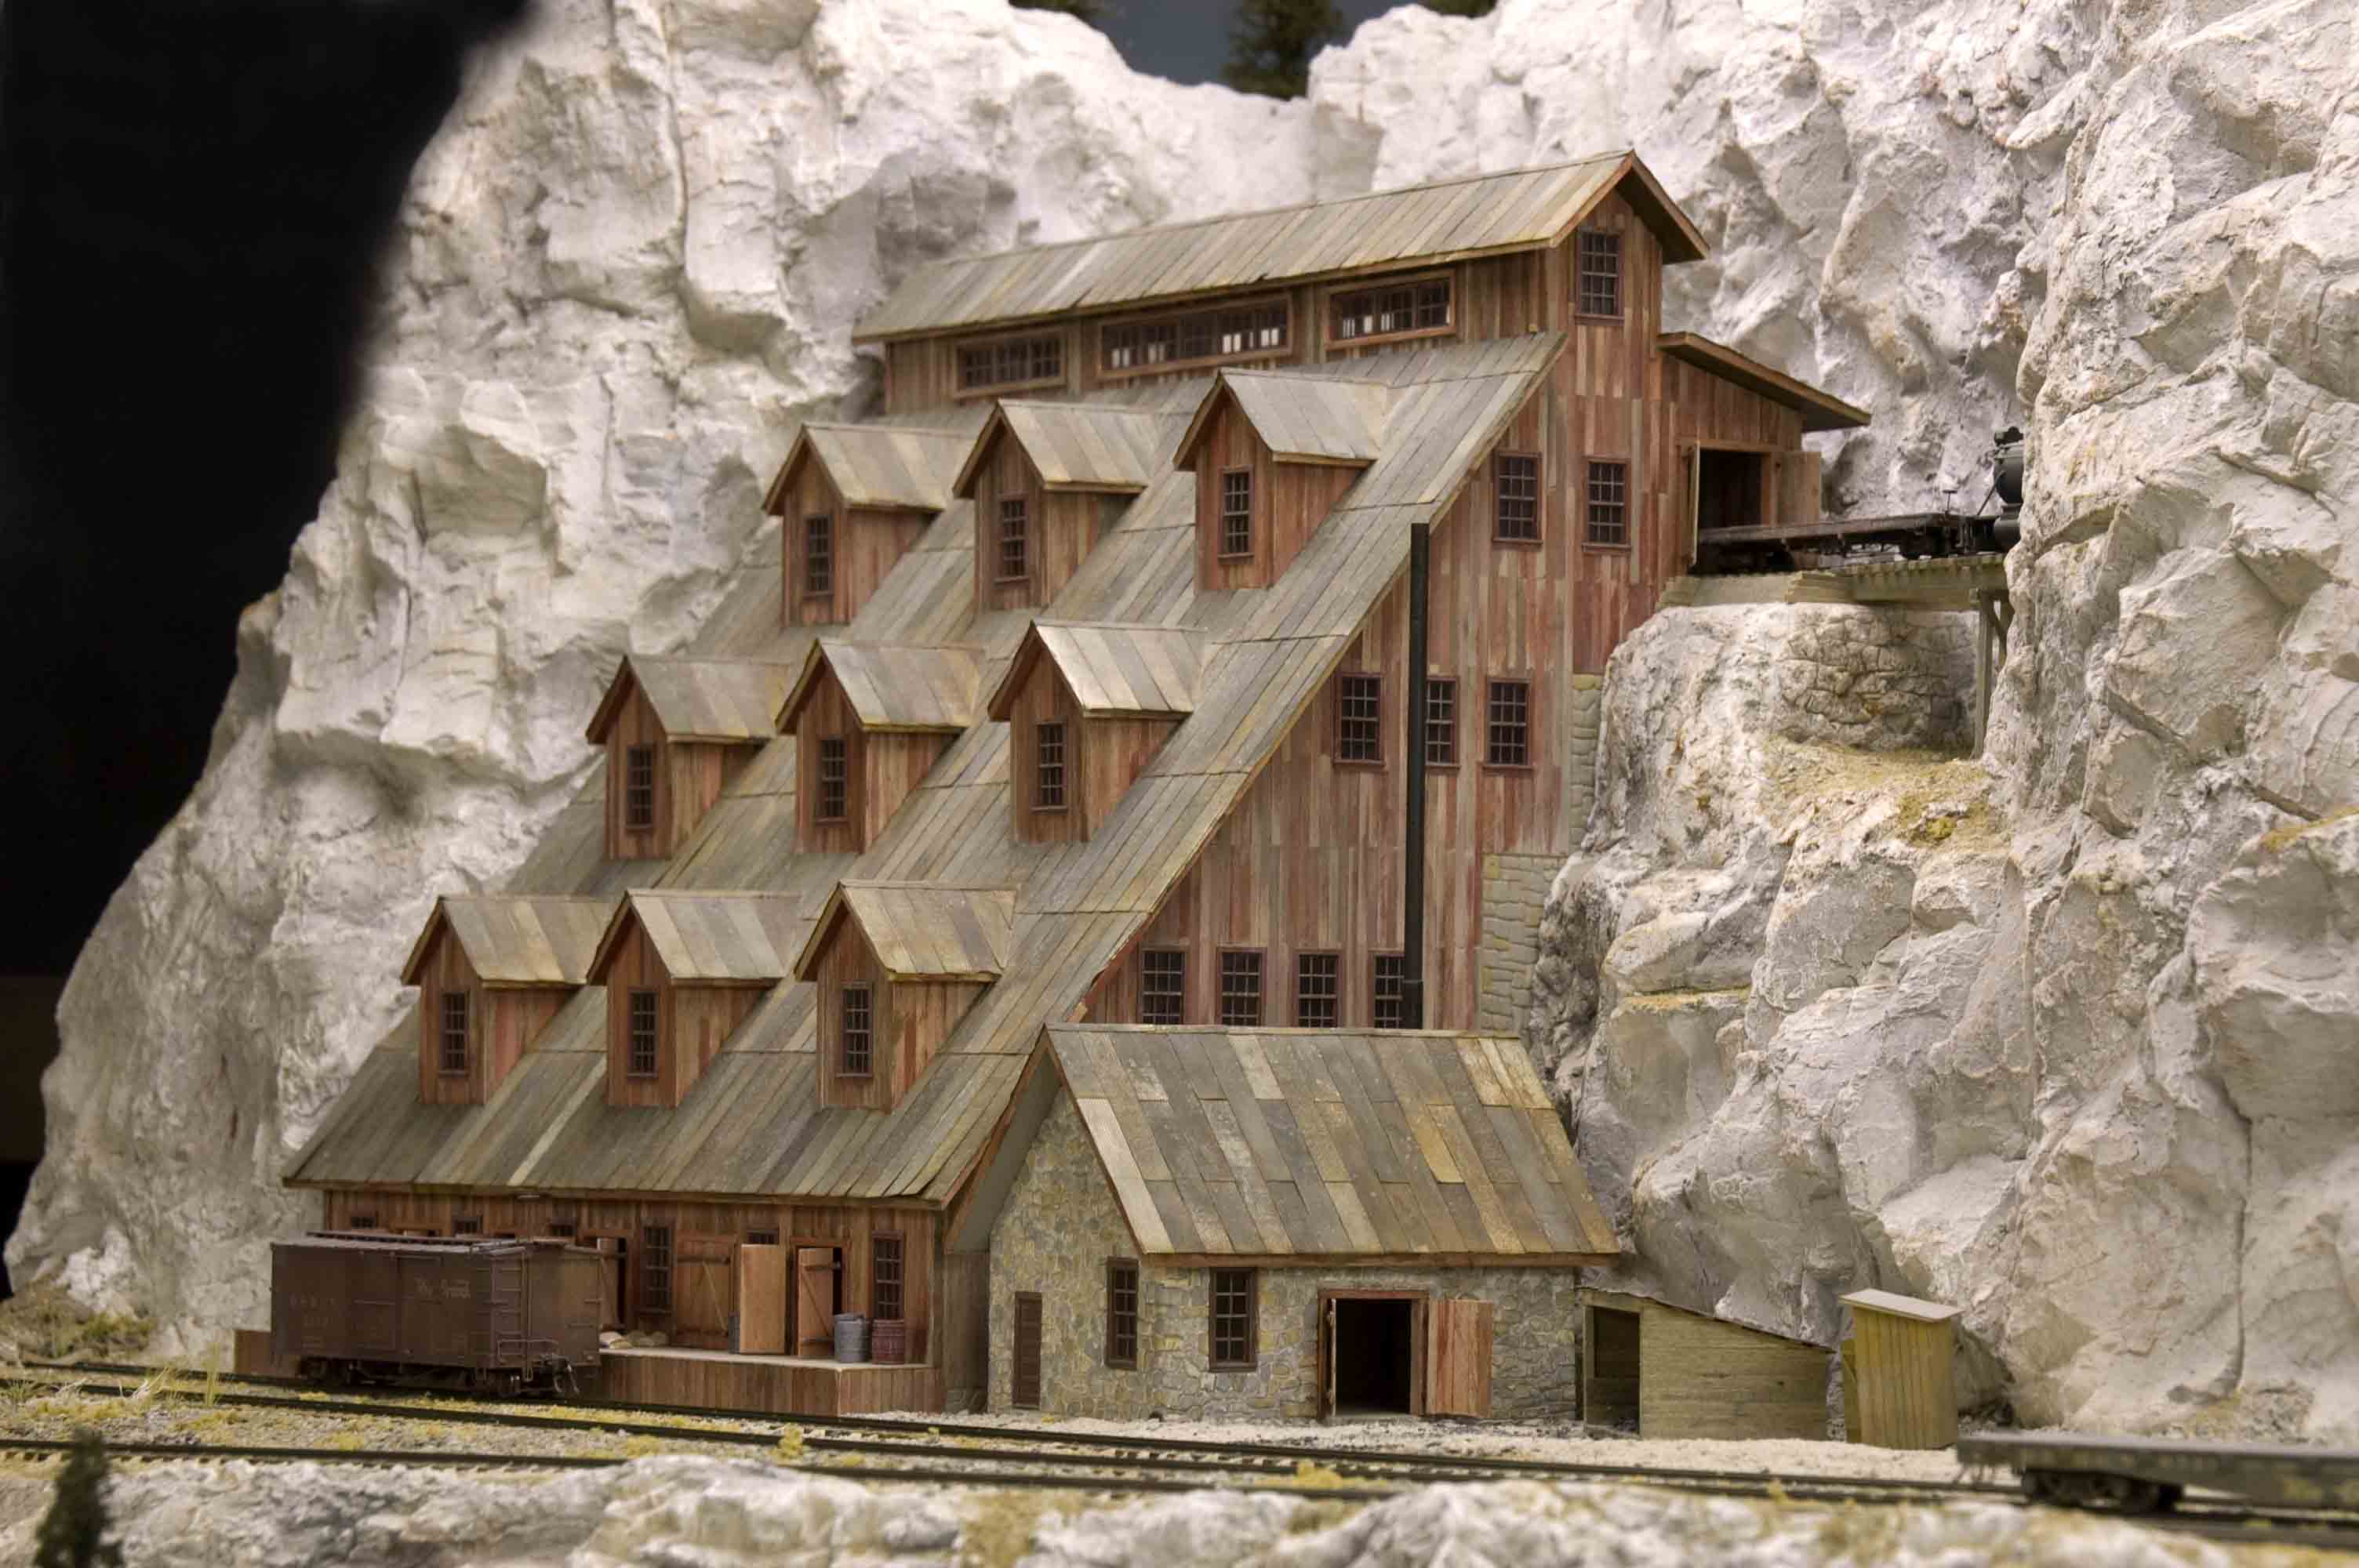 Many of the structures on the layout have been featured in product 